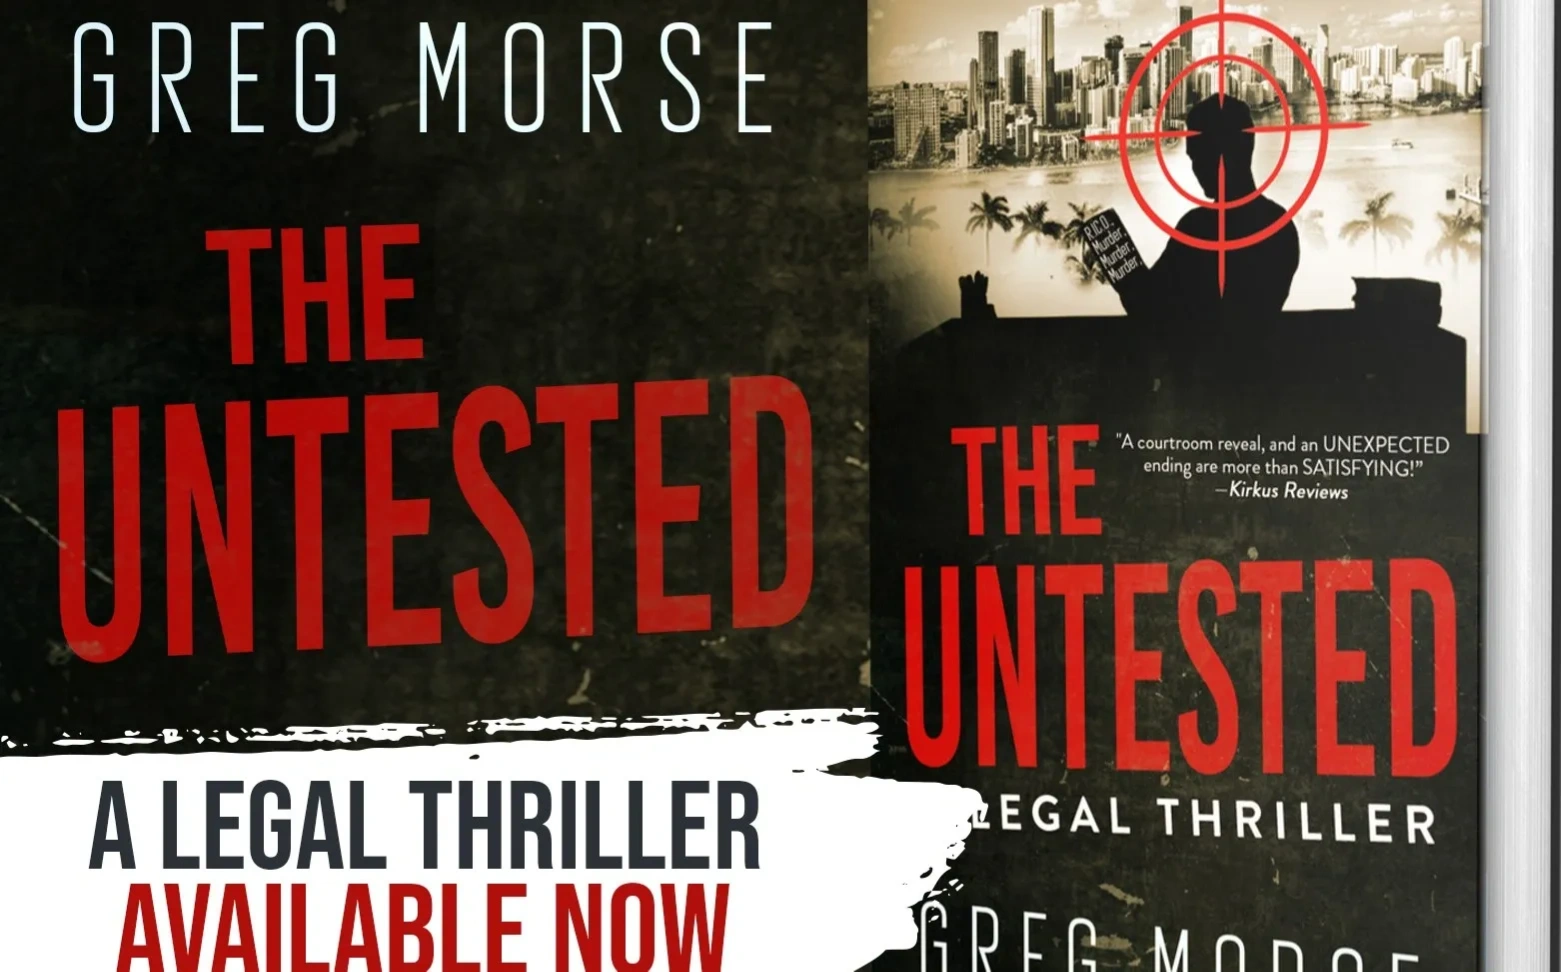 The Untested legal thriller nove fiction book